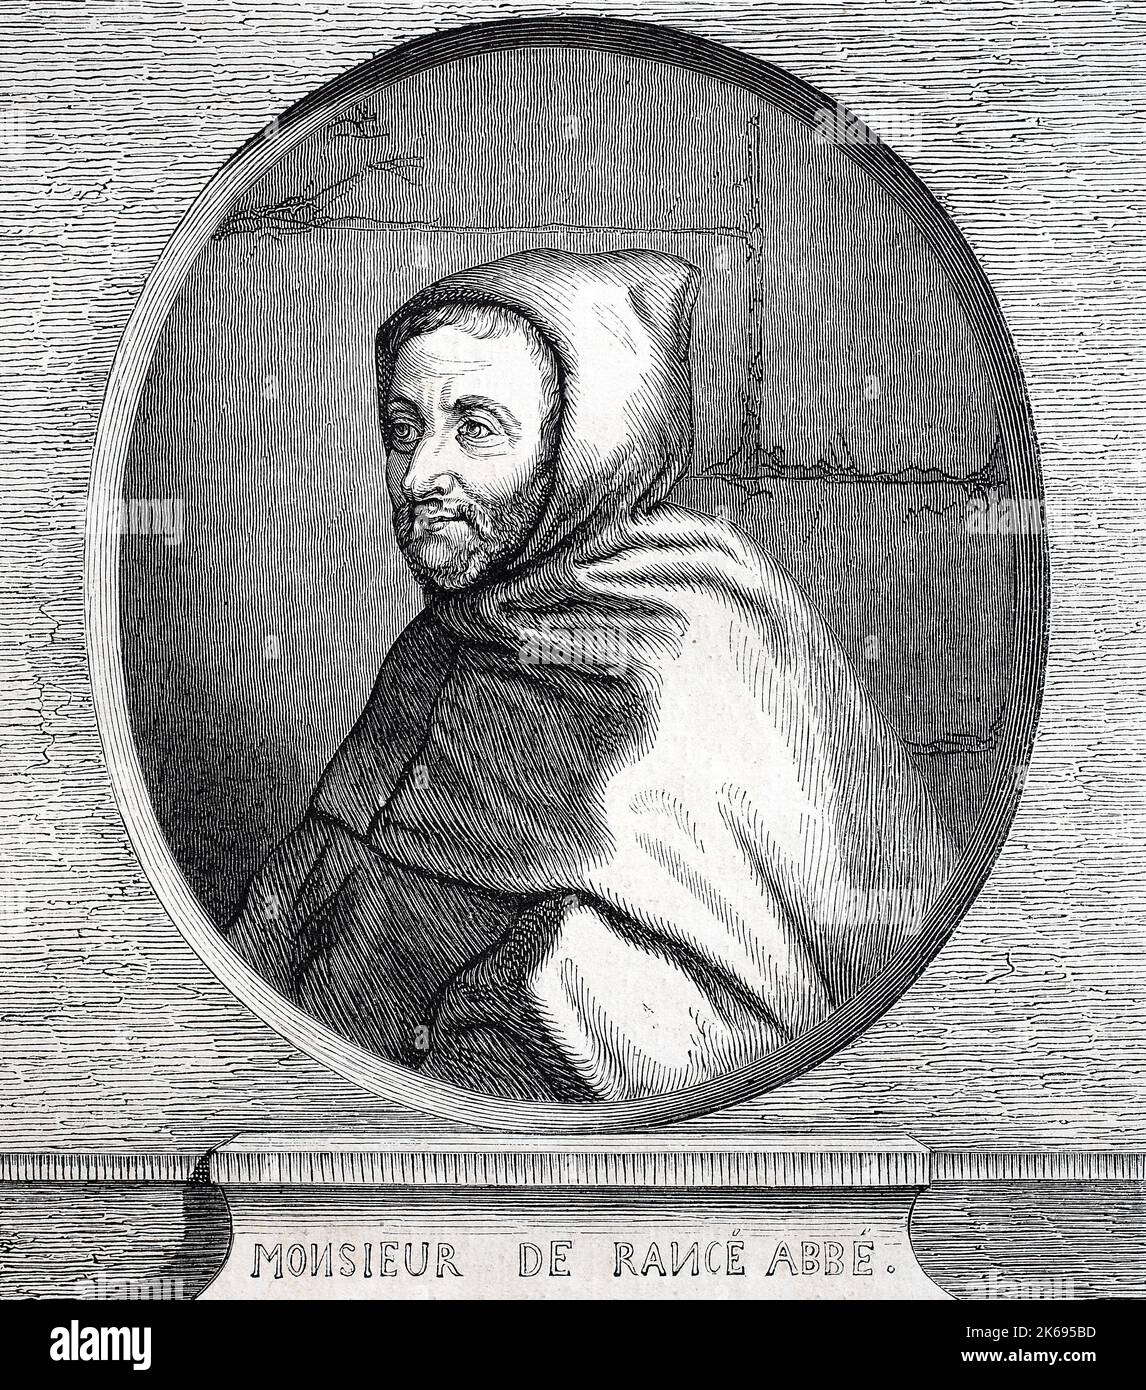 Digital improved reproduction, Armand Jean le Bouthillier de Rance, born 1626, died 1700, abbot and founder of the Trappist Cistercians, original woodprint from th 19th century Stock Photo